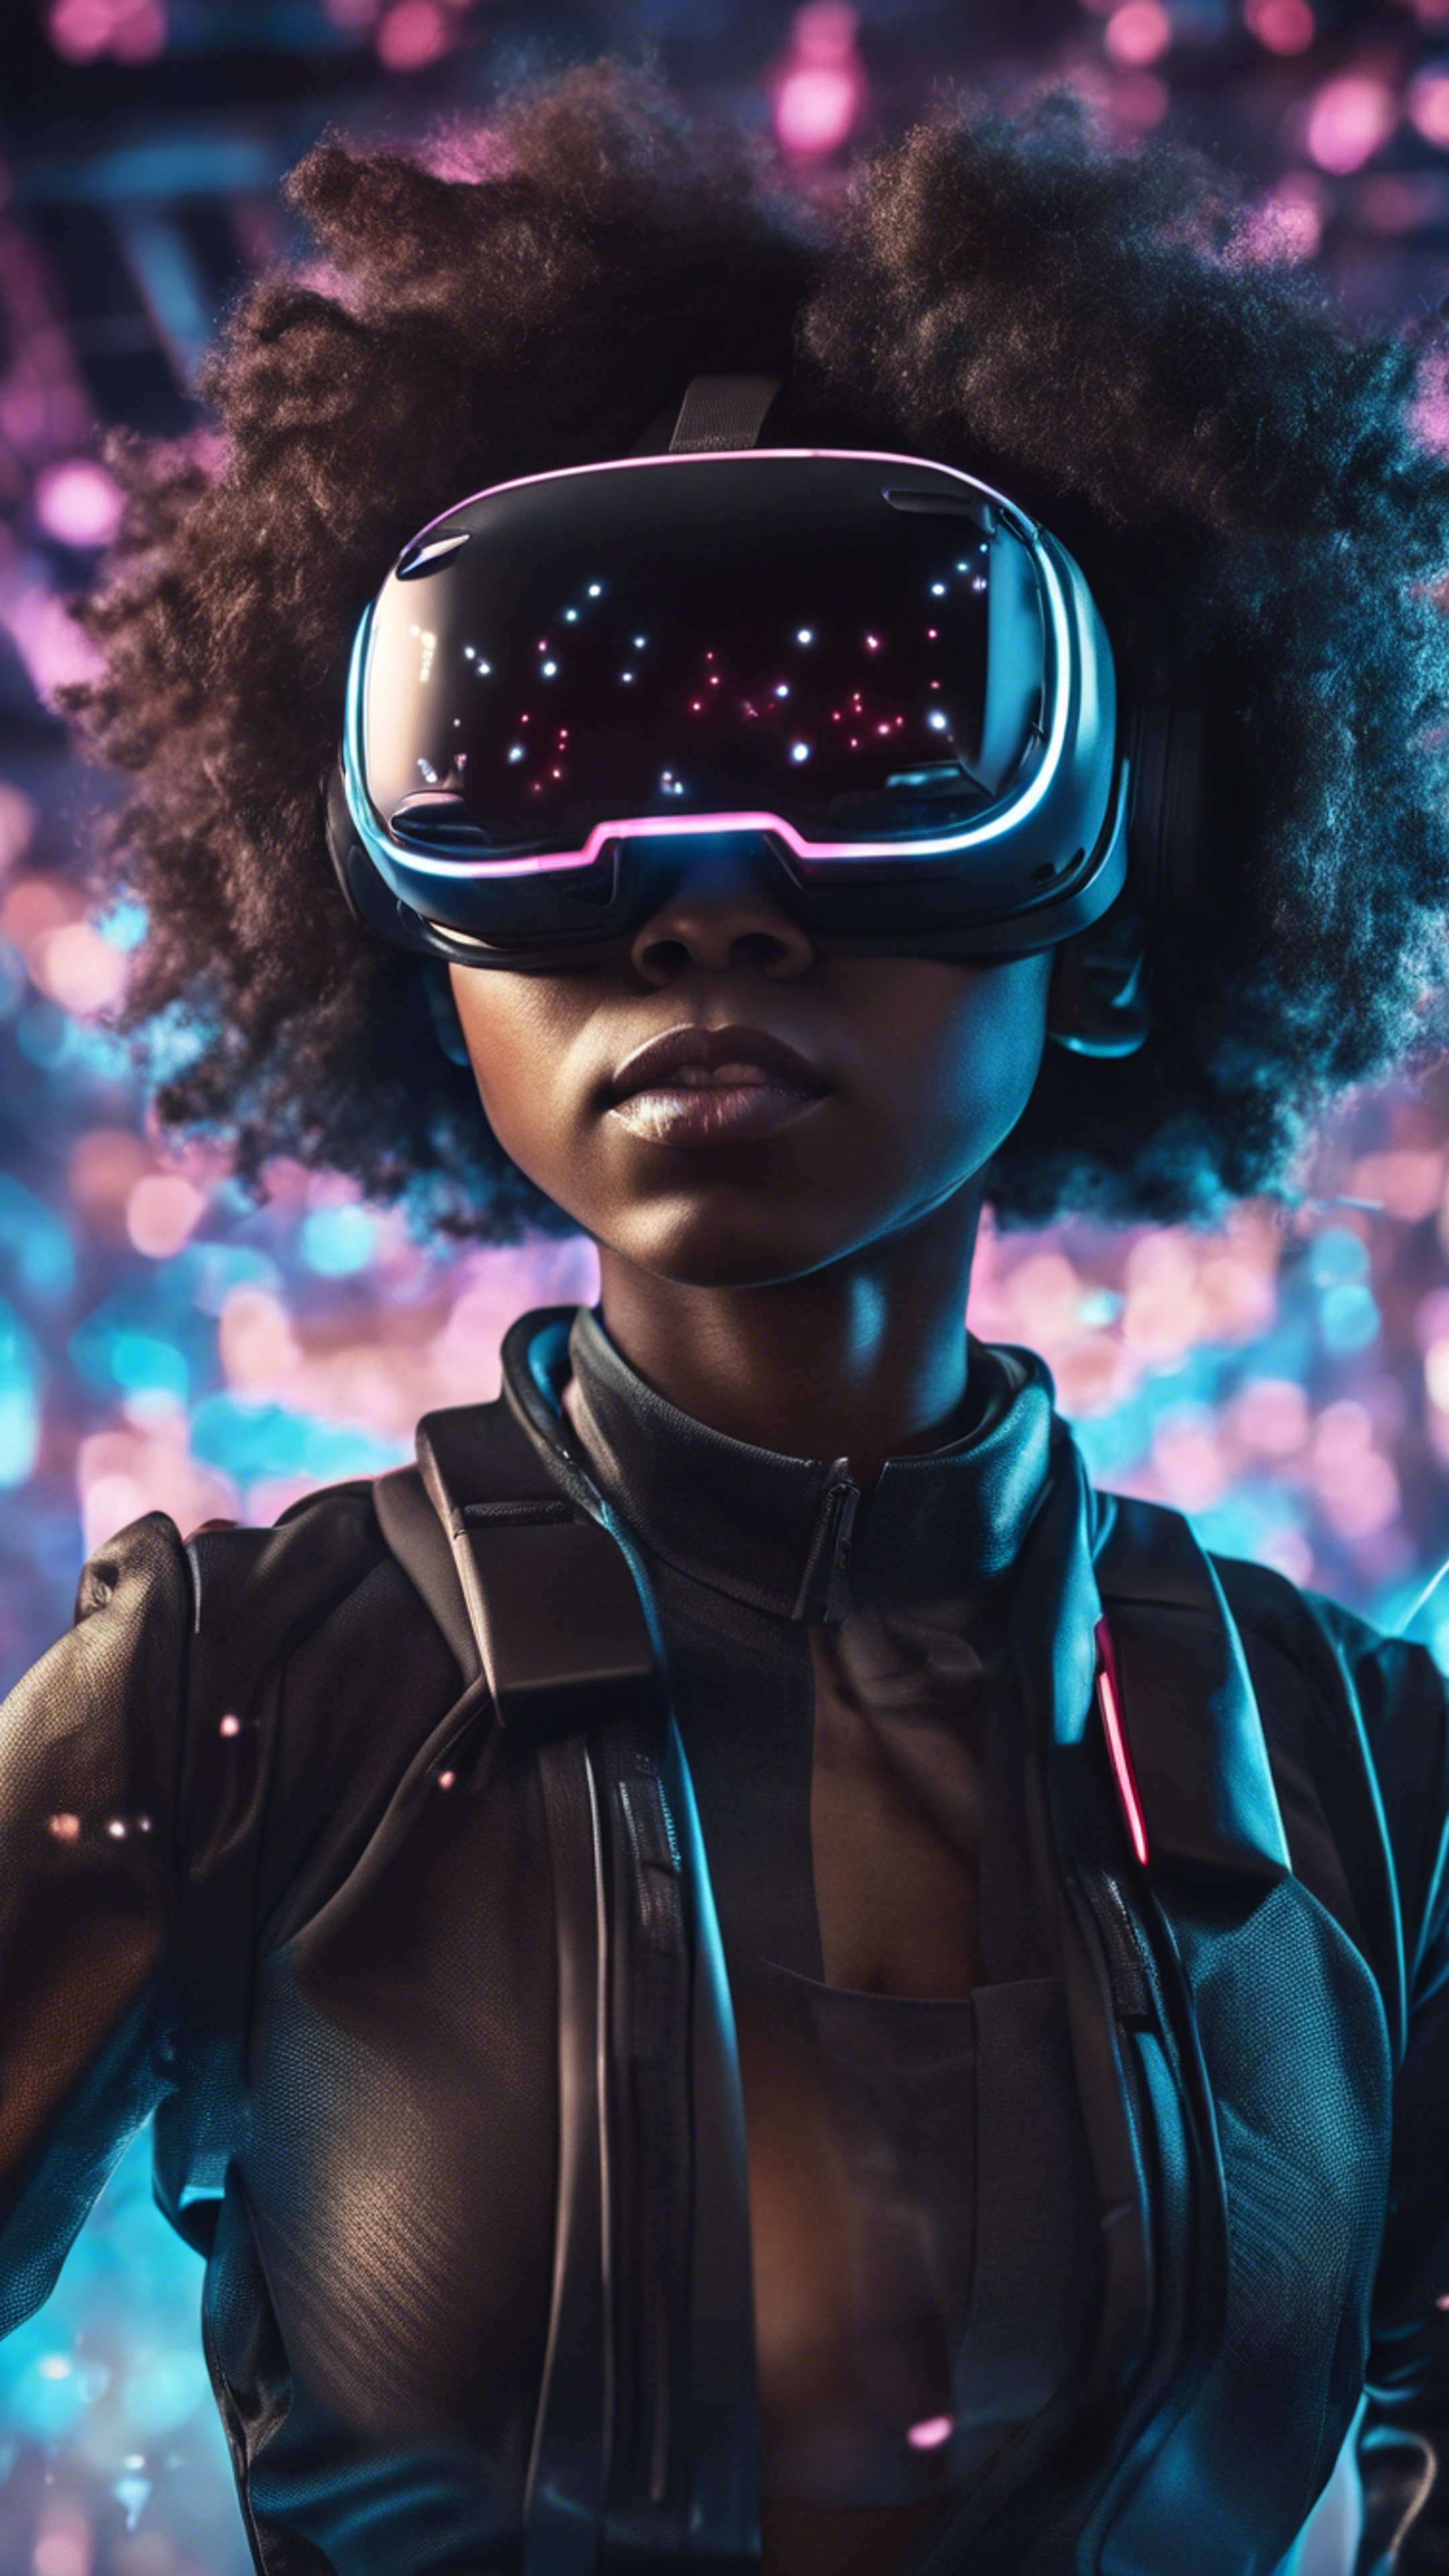 A black girl wearing a virtual reality headset completely immersed in a futuristic cyberspace. Fondo de pantalla[0f80f55163a8478e8707]